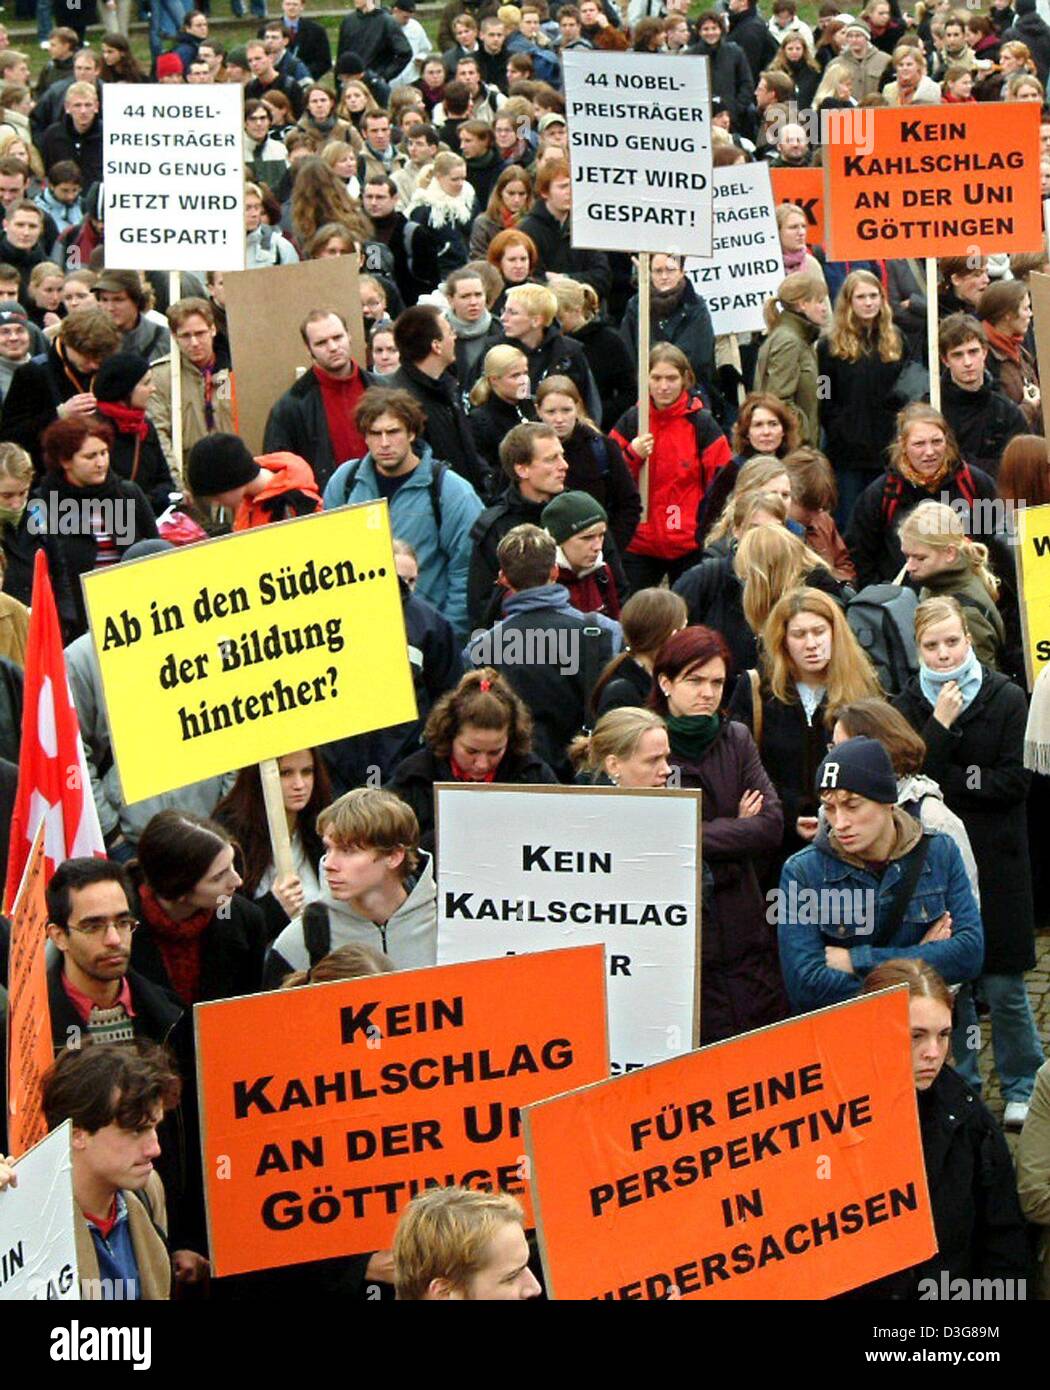 (dpa) - About 1,500 demonstrators protest against cuts in the university and science sector in Goettingen, Germany, 22 October 2003. The posters read 'Ab in den Sueden... der Bildung hinterher?' (going south... to chase education?), 'Kein Kahlschlag an der Uni Goettingen' (no clear-cut at the university of Goettingen), and '44 Nobelpreistraeger sind genug - jetzt wird gespart' (44  Stock Photo